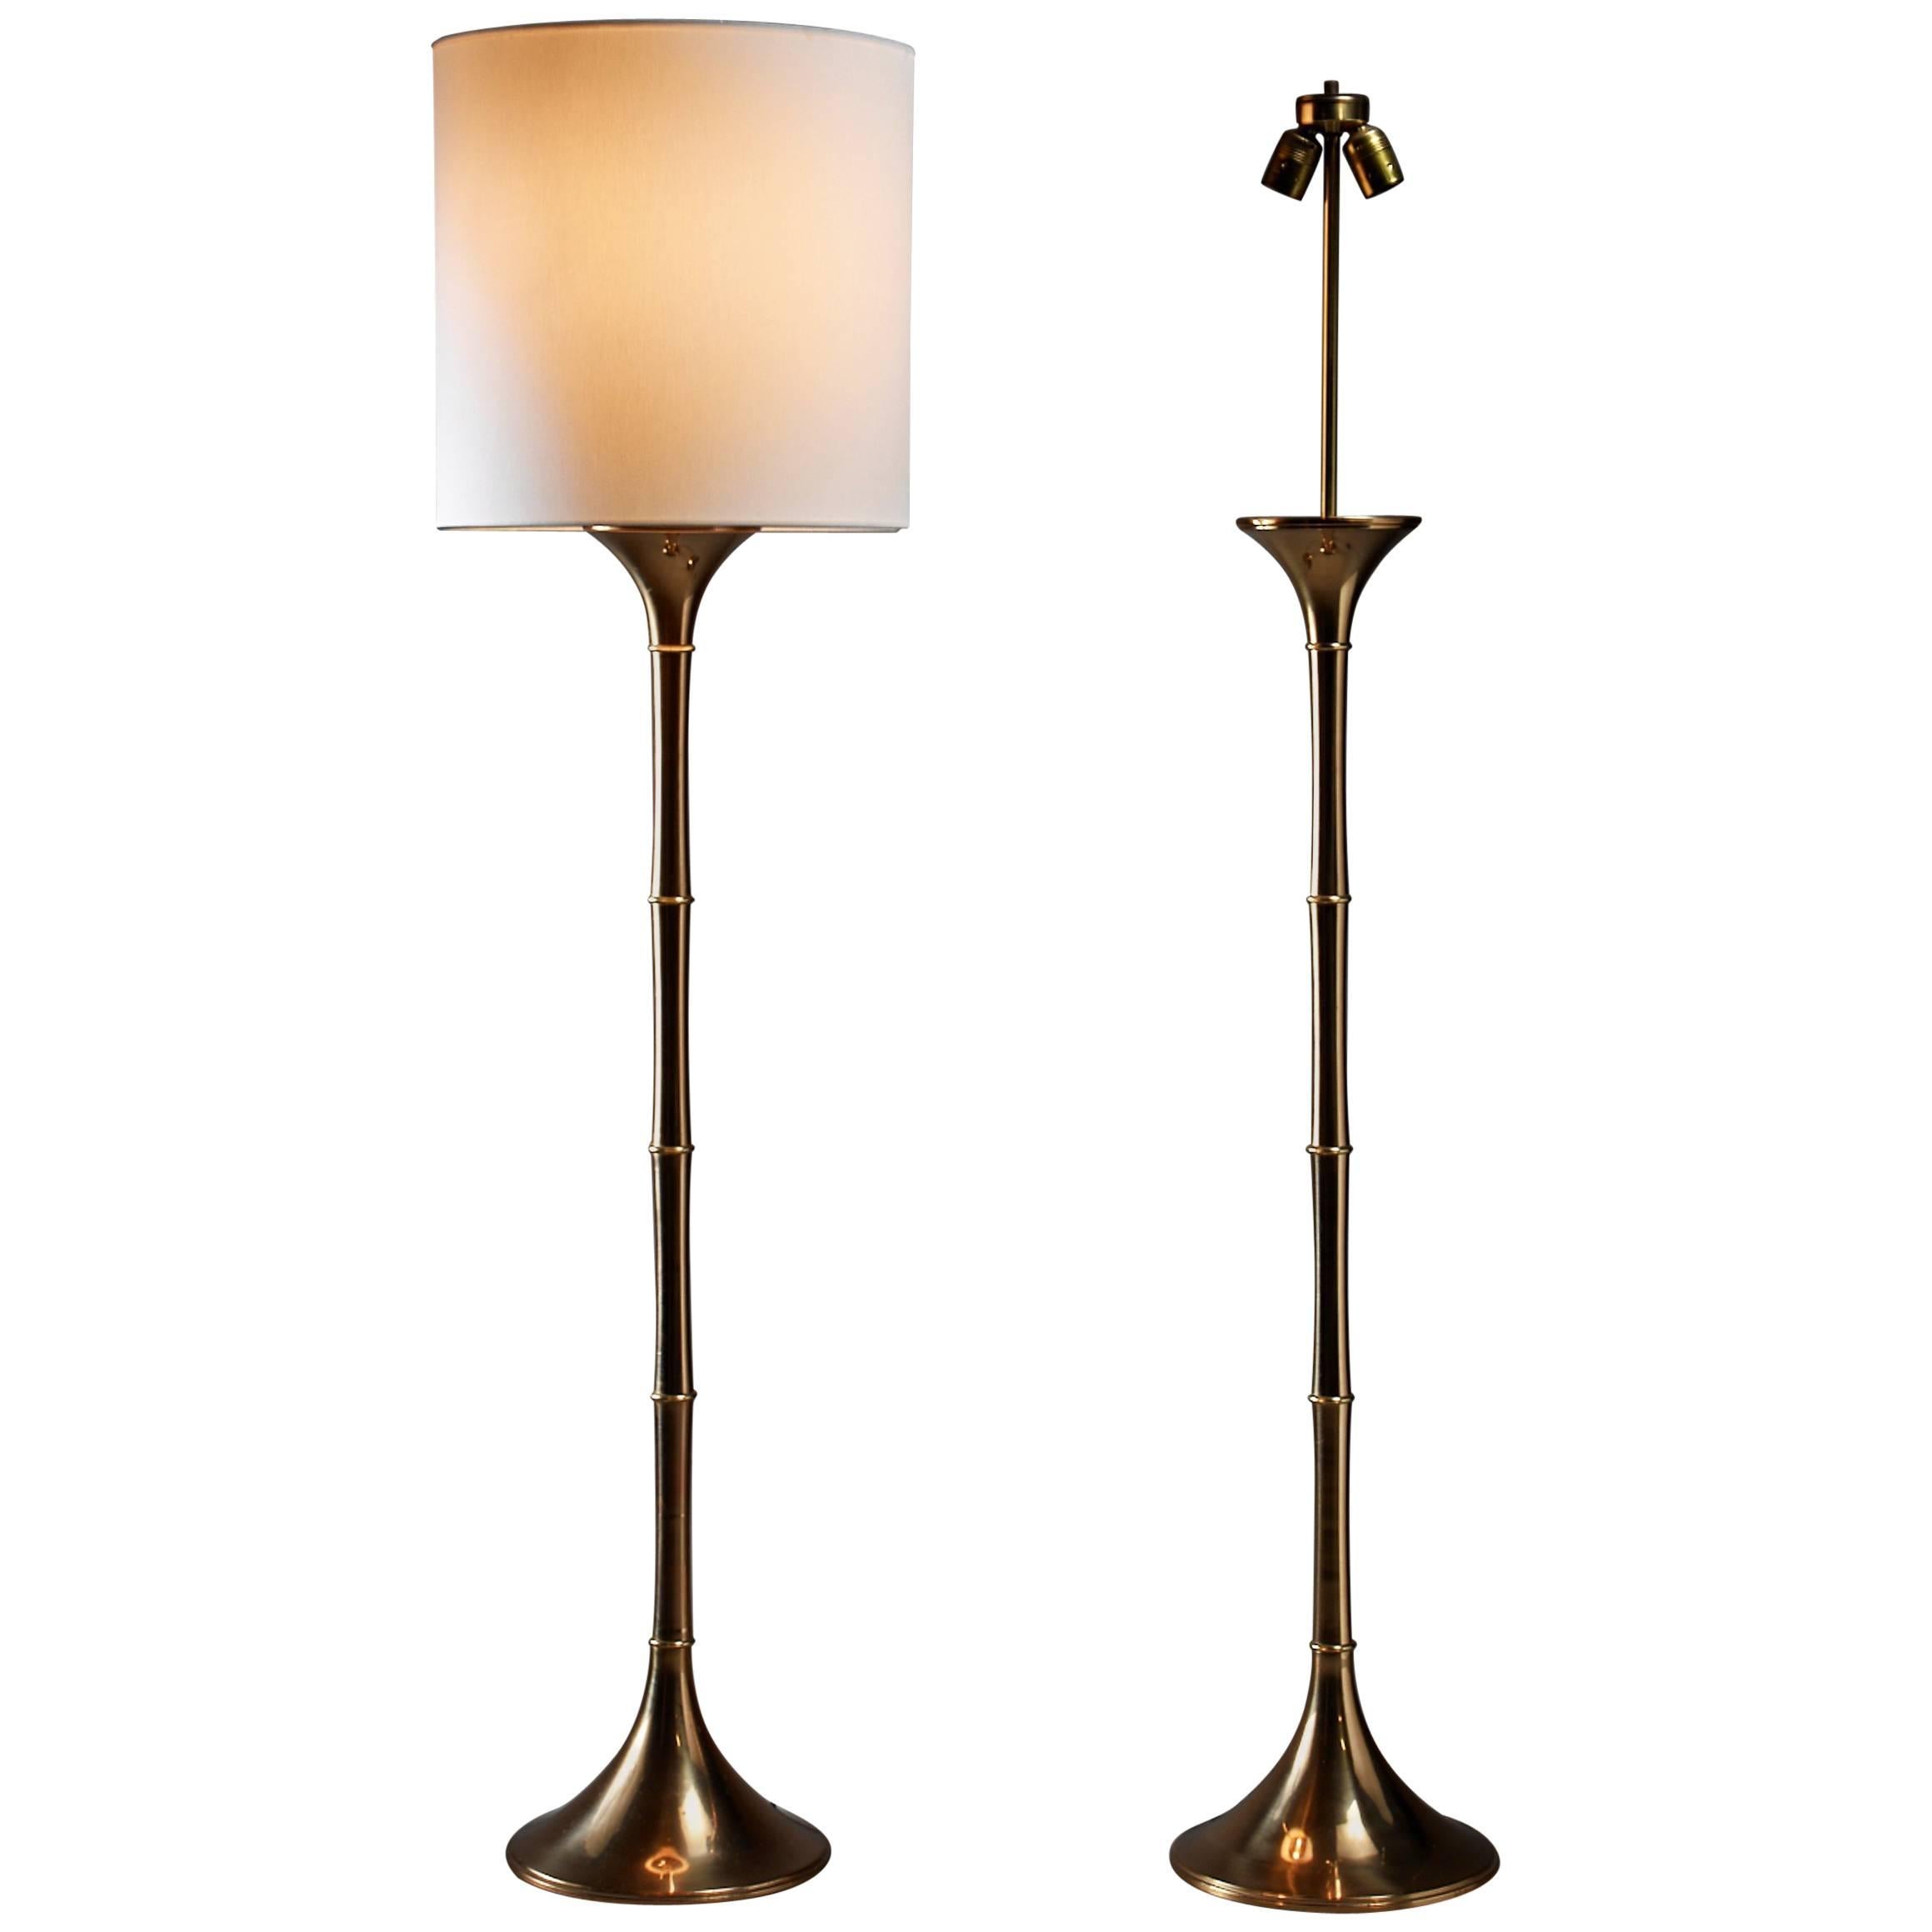 Ingo Maurer Pair of Brass 'Bamboo' Floor Lamps, Germany, 1960s For Sale